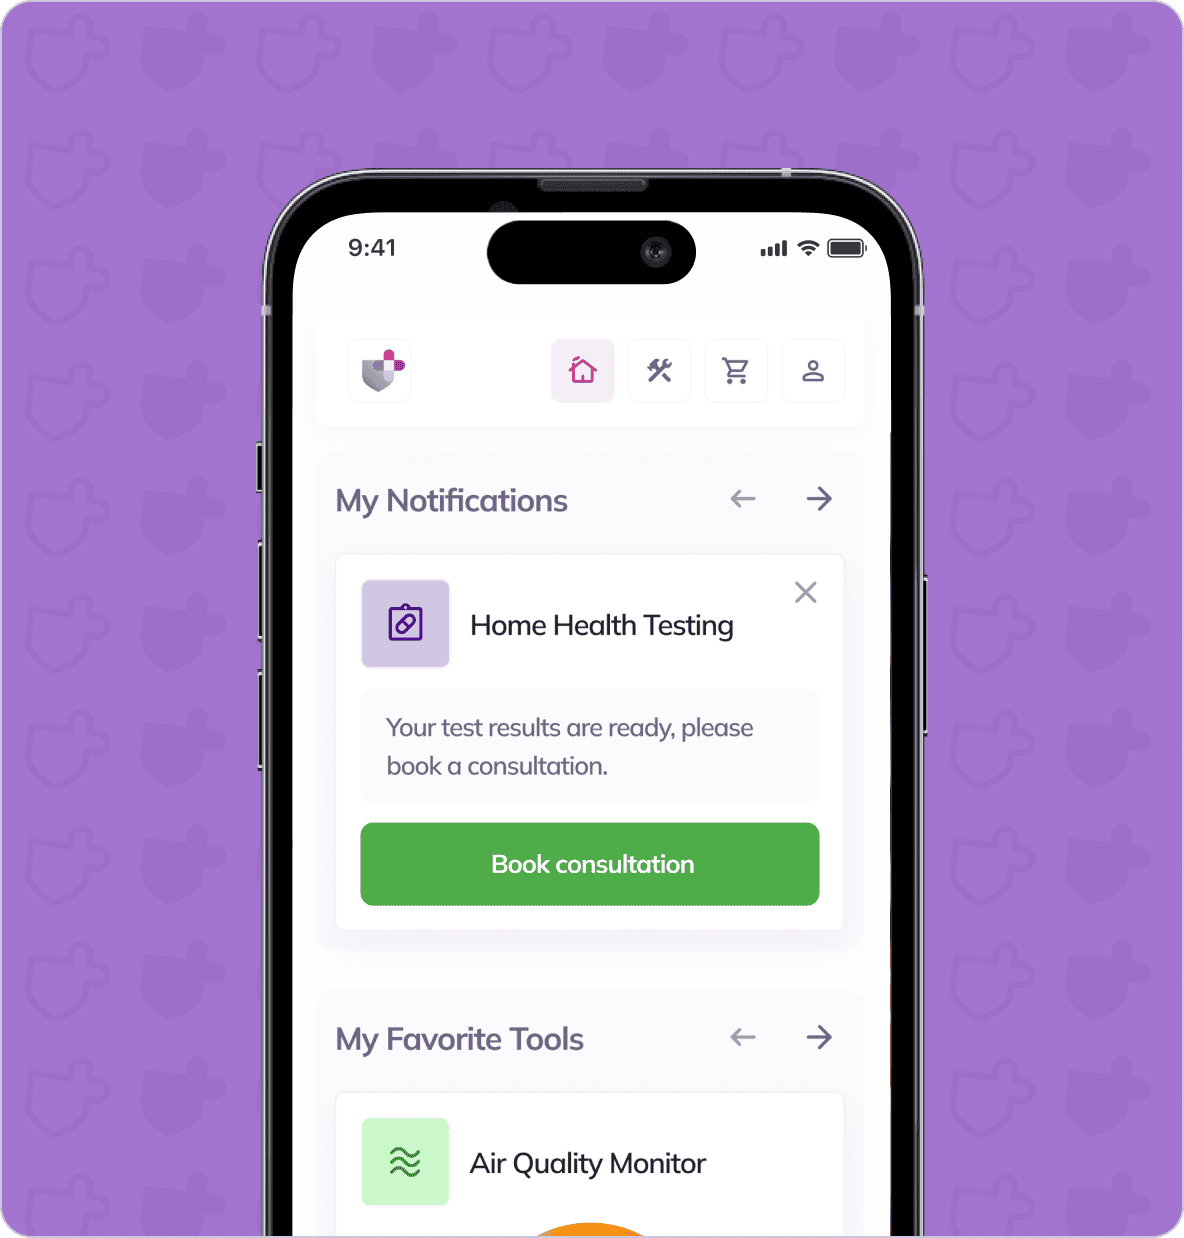 A smartphone screen displaying a health app; a notification for home health testing is visible, prompting the user to book a consultation. The background is purple with shield icons.